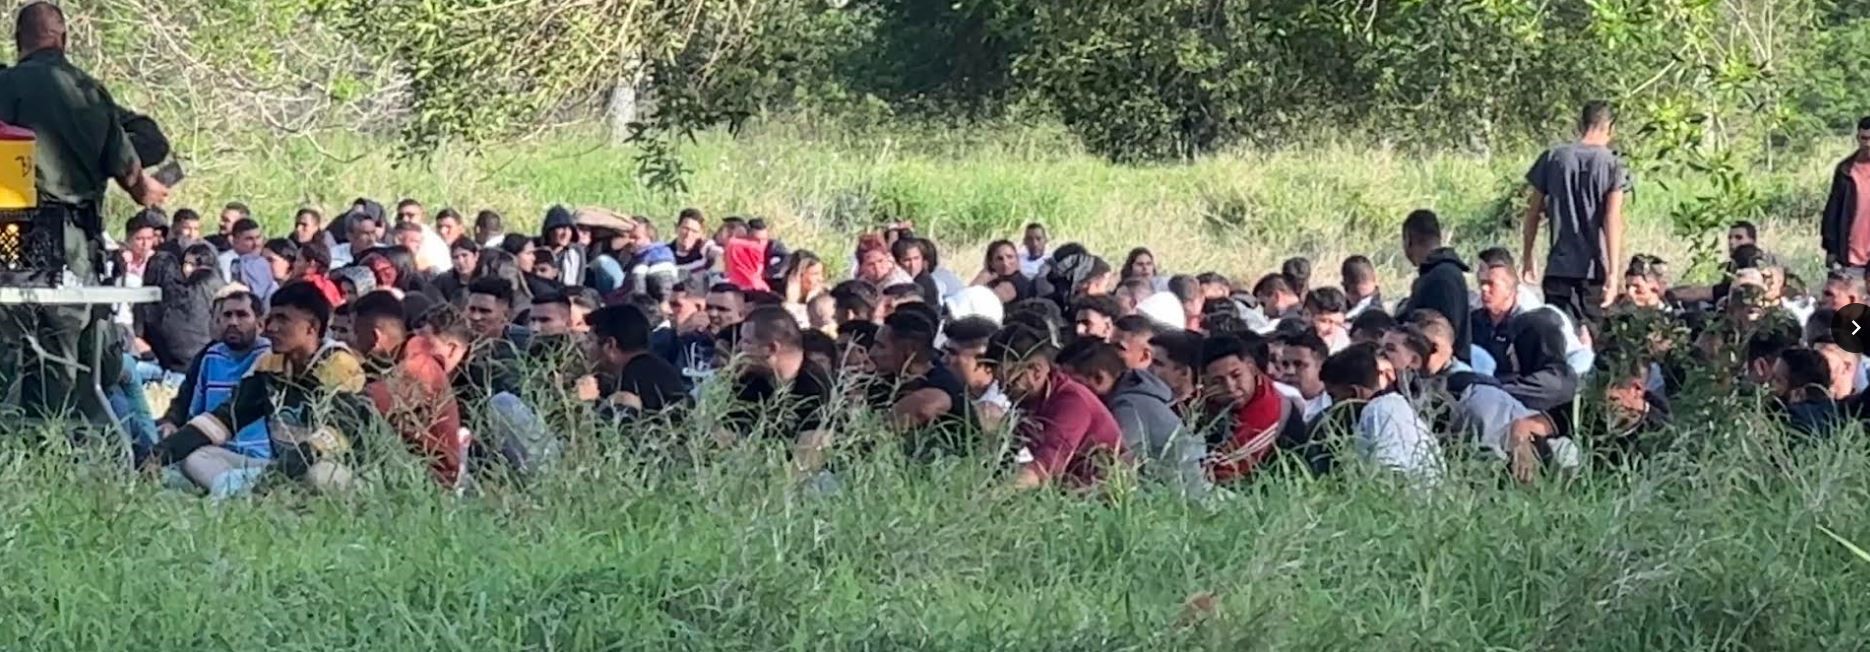 Thousands of illegal immigrants began crossing and turning themselves in for processing in late April from Matamoros to Brownsville